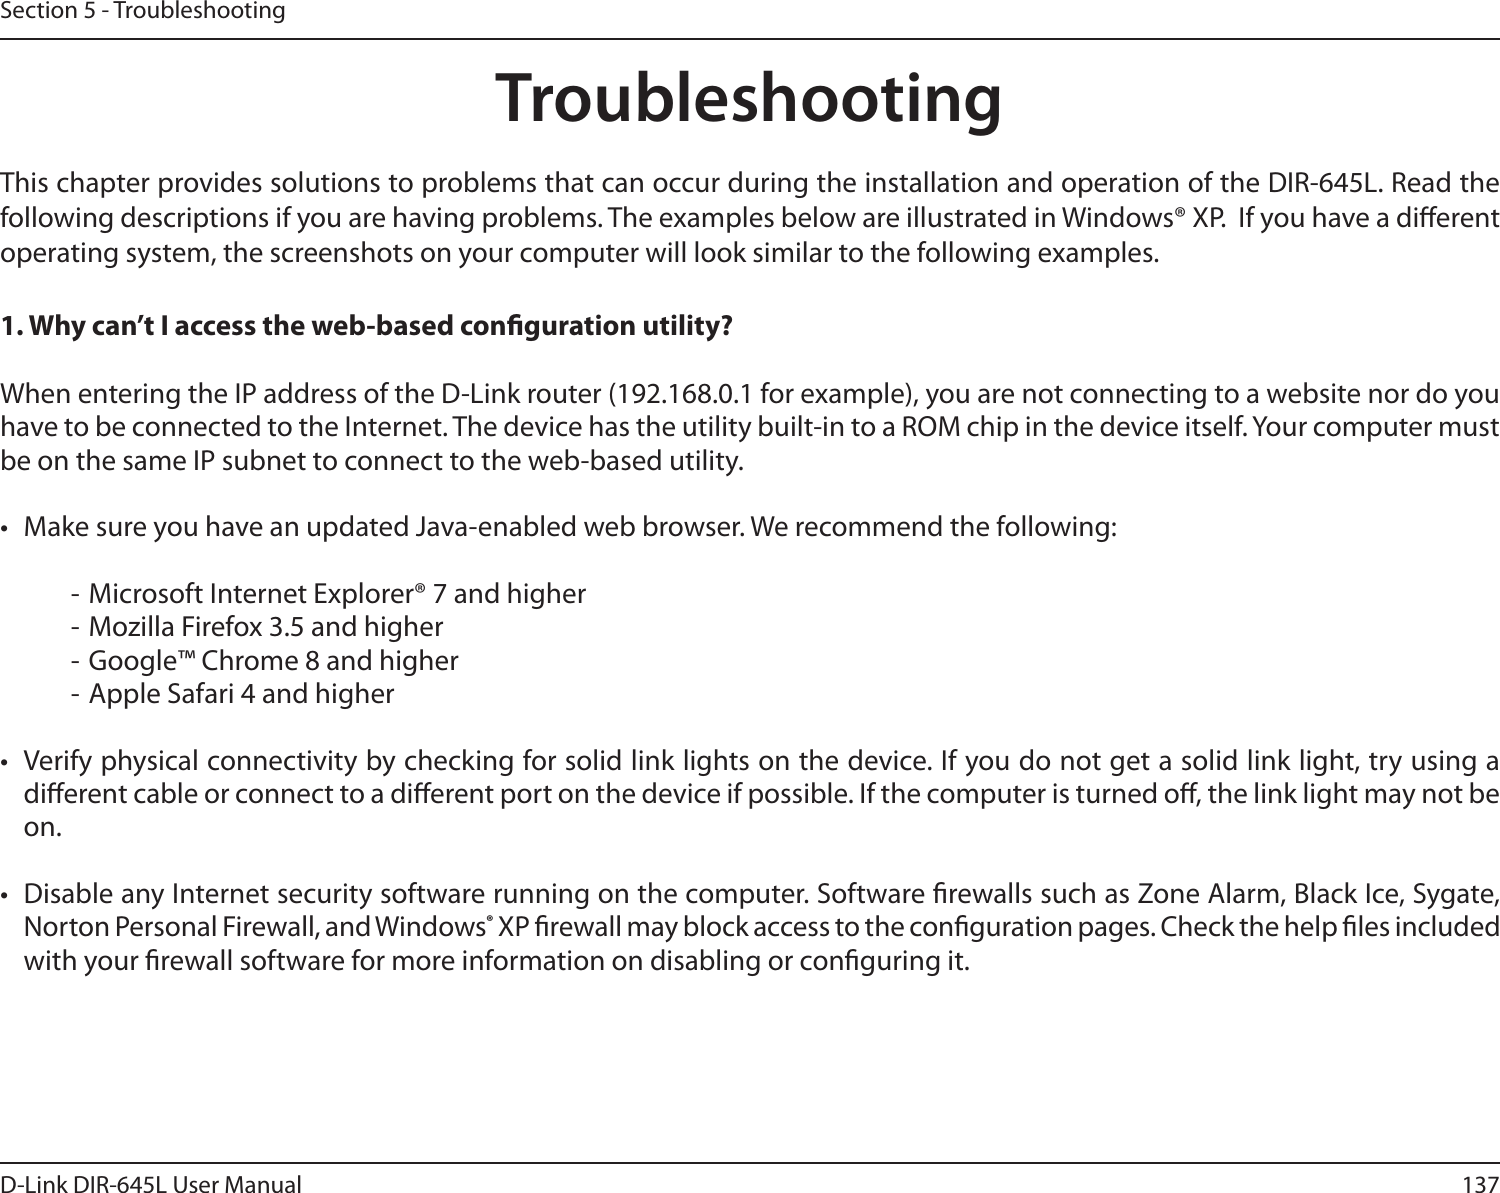 137D-Link DIR-645L User ManualSection 5 - TroubleshootingTroubleshootingThis chapter provides solutions to problems that can occur during the installation and operation of the DIR-645L. Read the following descriptions if you are having problems. The examples below are illustrated in Windows® XP.  If you have a dierent operating system, the screenshots on your computer will look similar to the following examples.1. Why can’t I access the web-based conguration utility?When entering the IP address of the D-Link router (192.168.0.1 for example), you are not connecting to a website nor do you have to be connected to the Internet. The device has the utility built-in to a ROM chip in the device itself. Your computer must be on the same IP subnet to connect to the web-based utility. •  Make sure you have an updated Java-enabled web browser. We recommend the following:  - Microsoft Internet Explorer® 7 and higher- Mozilla Firefox 3.5 and higher- Google™ Chrome 8 and higher- Apple Safari 4 and higher•  Verify physical connectivity by checking for solid link lights on the device. If you do not get a solid link light, try using a dierent cable or connect to a dierent port on the device if possible. If the computer is turned o, the link light may not be on.•  Disable any Internet security software running on the computer. Software rewalls such as Zone Alarm, Black Ice, Sygate, Norton Personal Firewall, and Windows® XP rewall may block access to the conguration pages. Check the help les included with your rewall software for more information on disabling or conguring it.